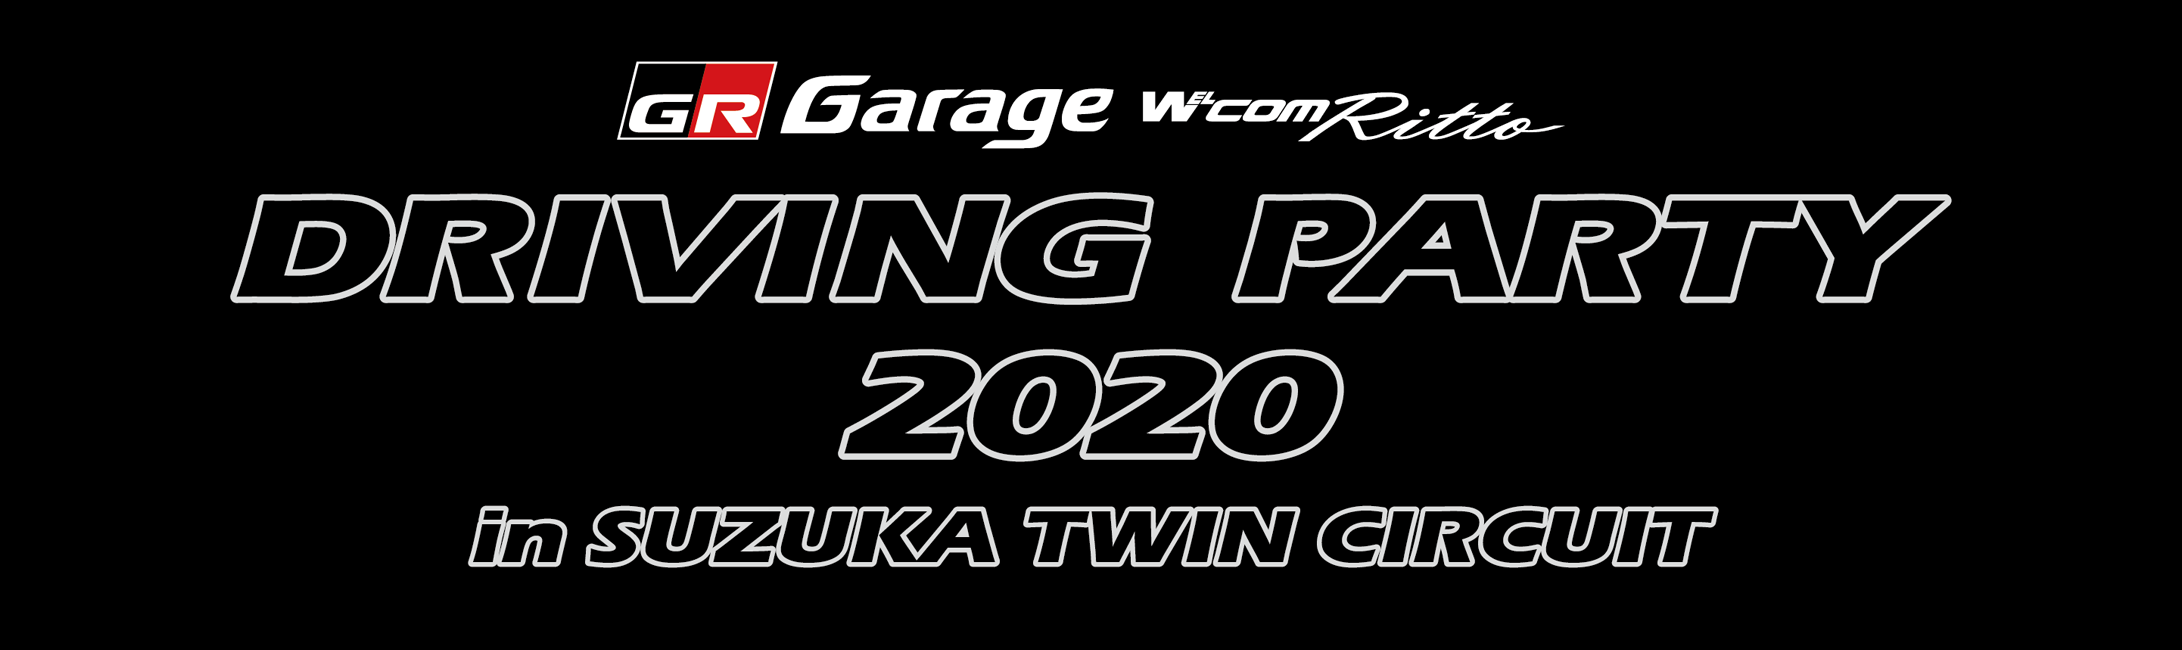 DRIVING PARTY 2020